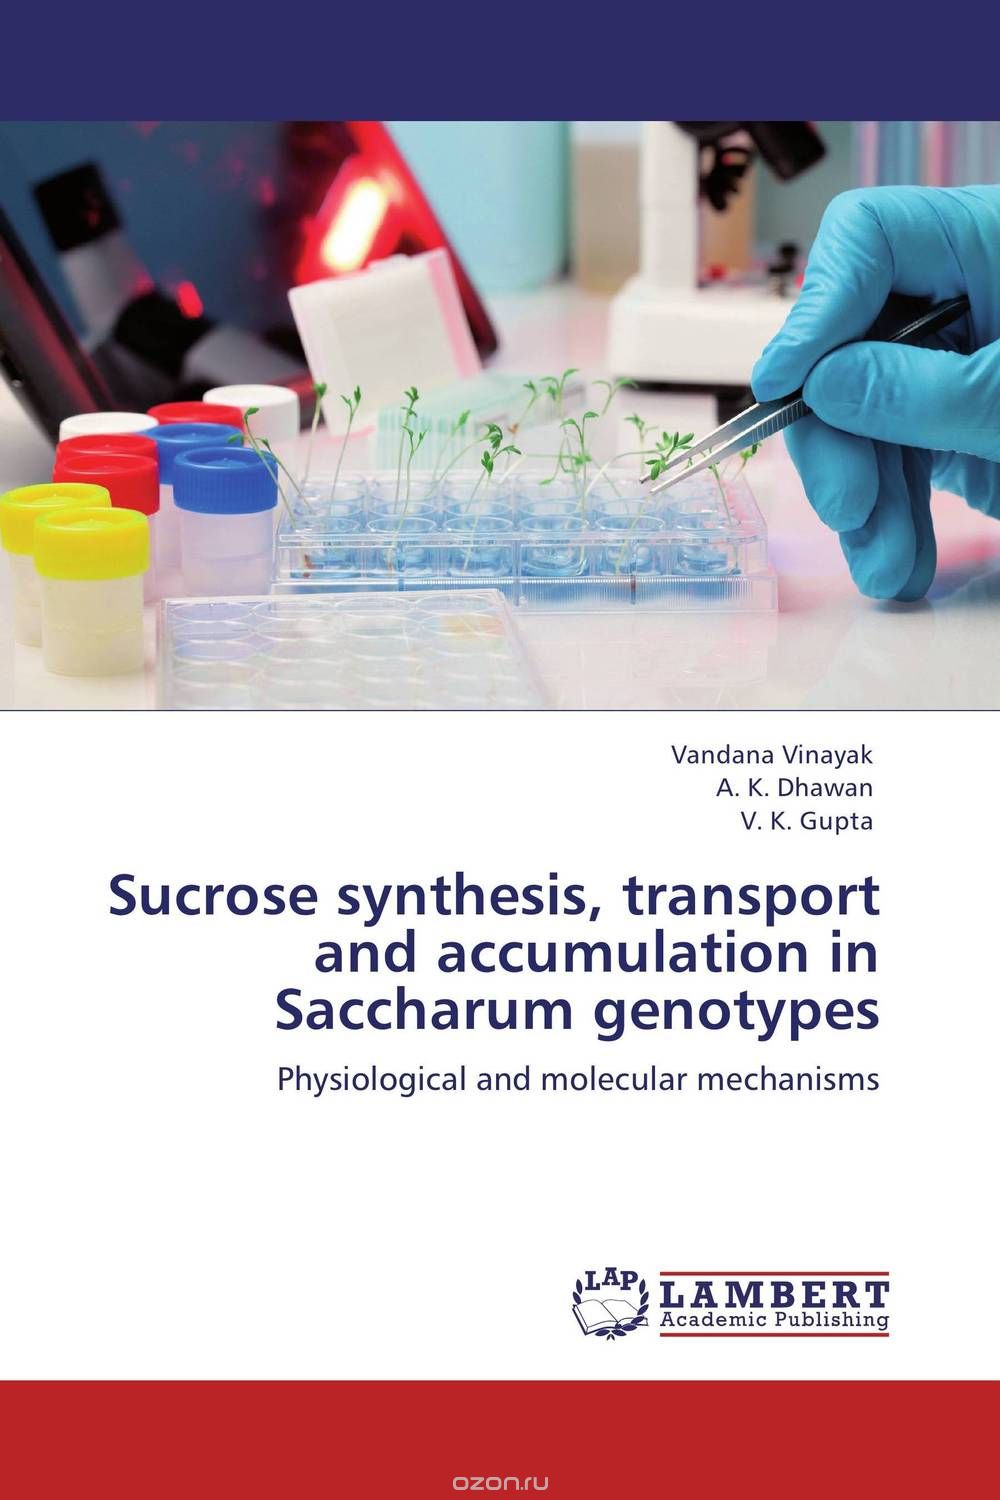 Sucrose synthesis, transport and accumulation in Saccharum genotypes